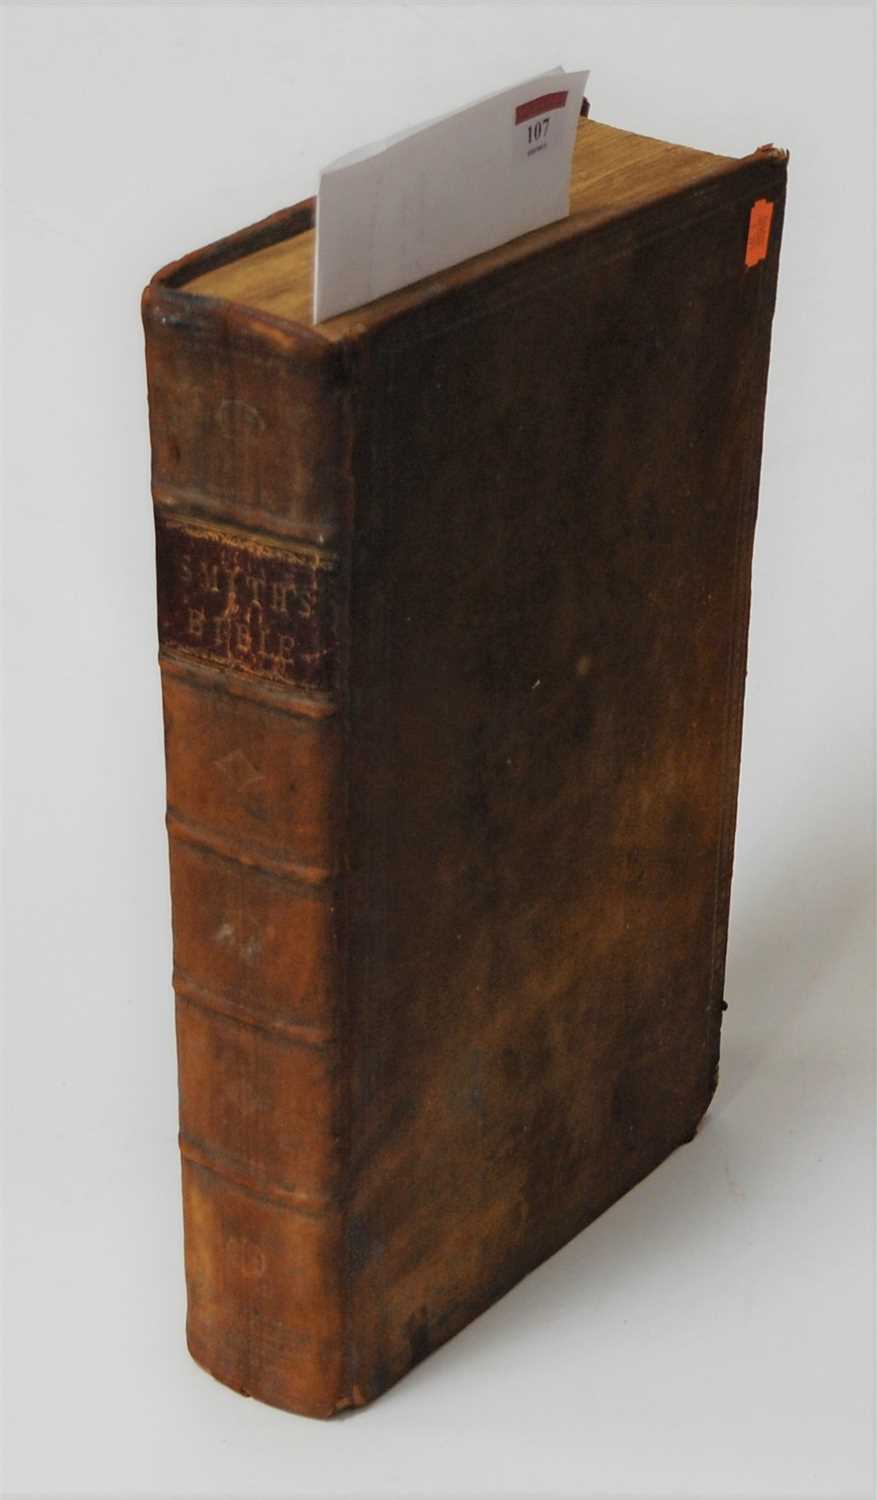 Lot 107 - An early 19th century Smith's Bible, with...